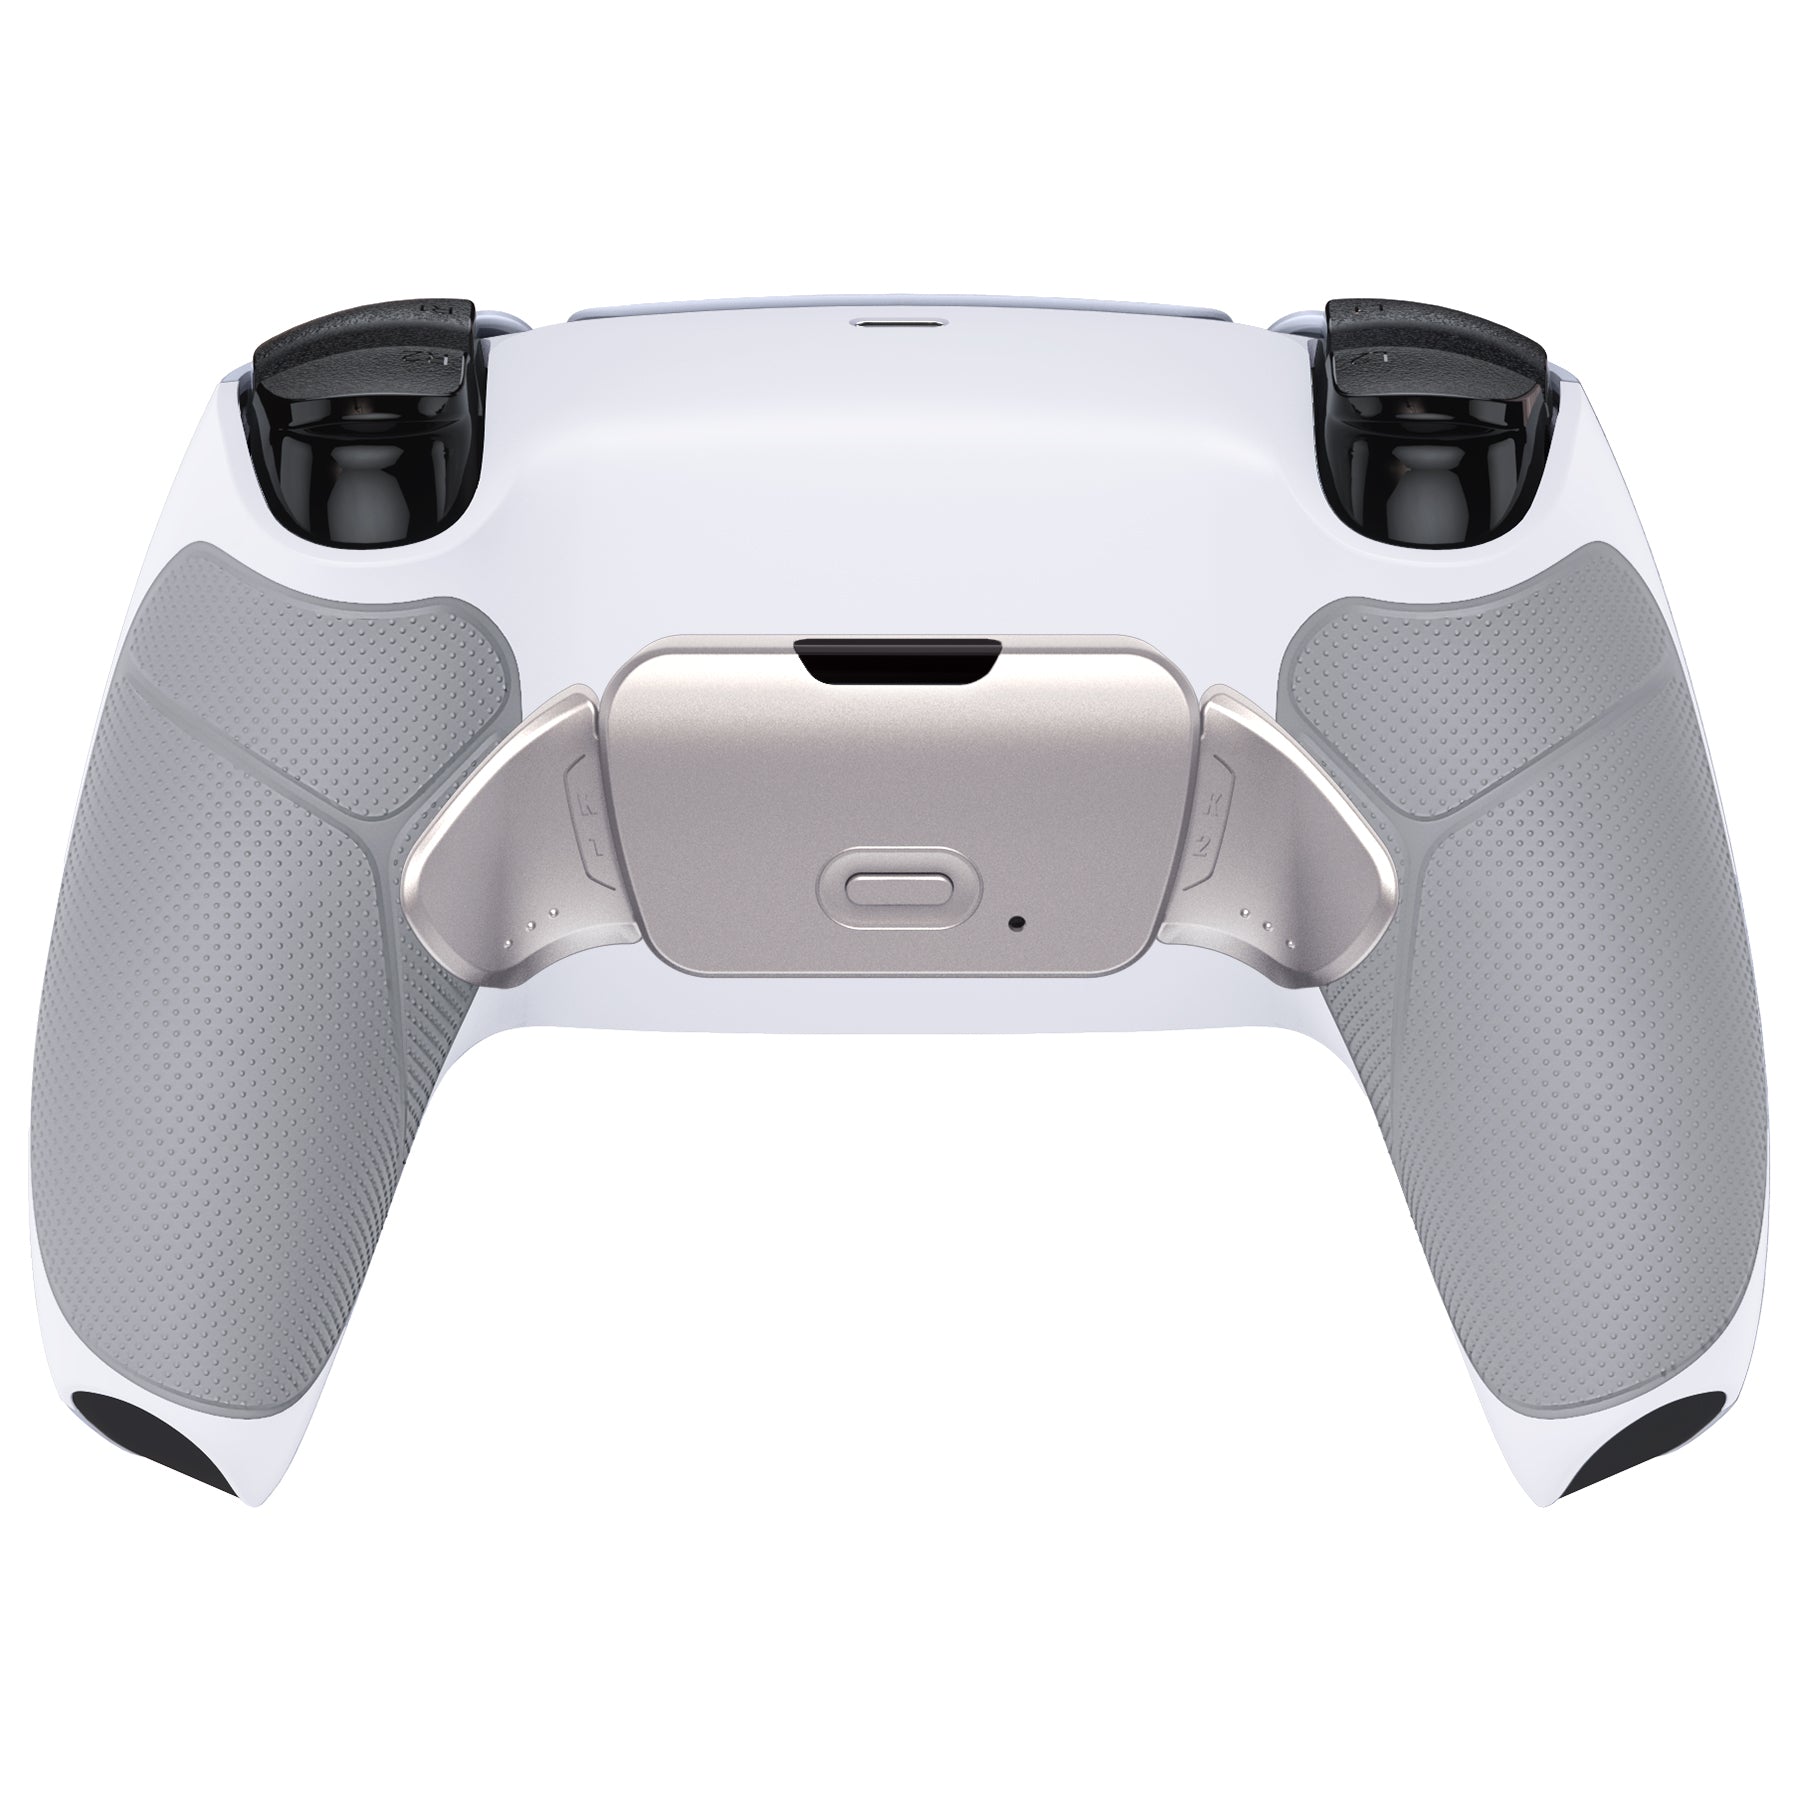 eXtremeRate Retail Silver Real Metal Buttons (RMB) Version RISE Remap Kit for PS5 Controller BDM-030 with Gray Rubberized Grip White Redesigned Back Shell, Upgraded Remappable Back Buttons Attachment for PS5 Controller - XPFJ7006G3